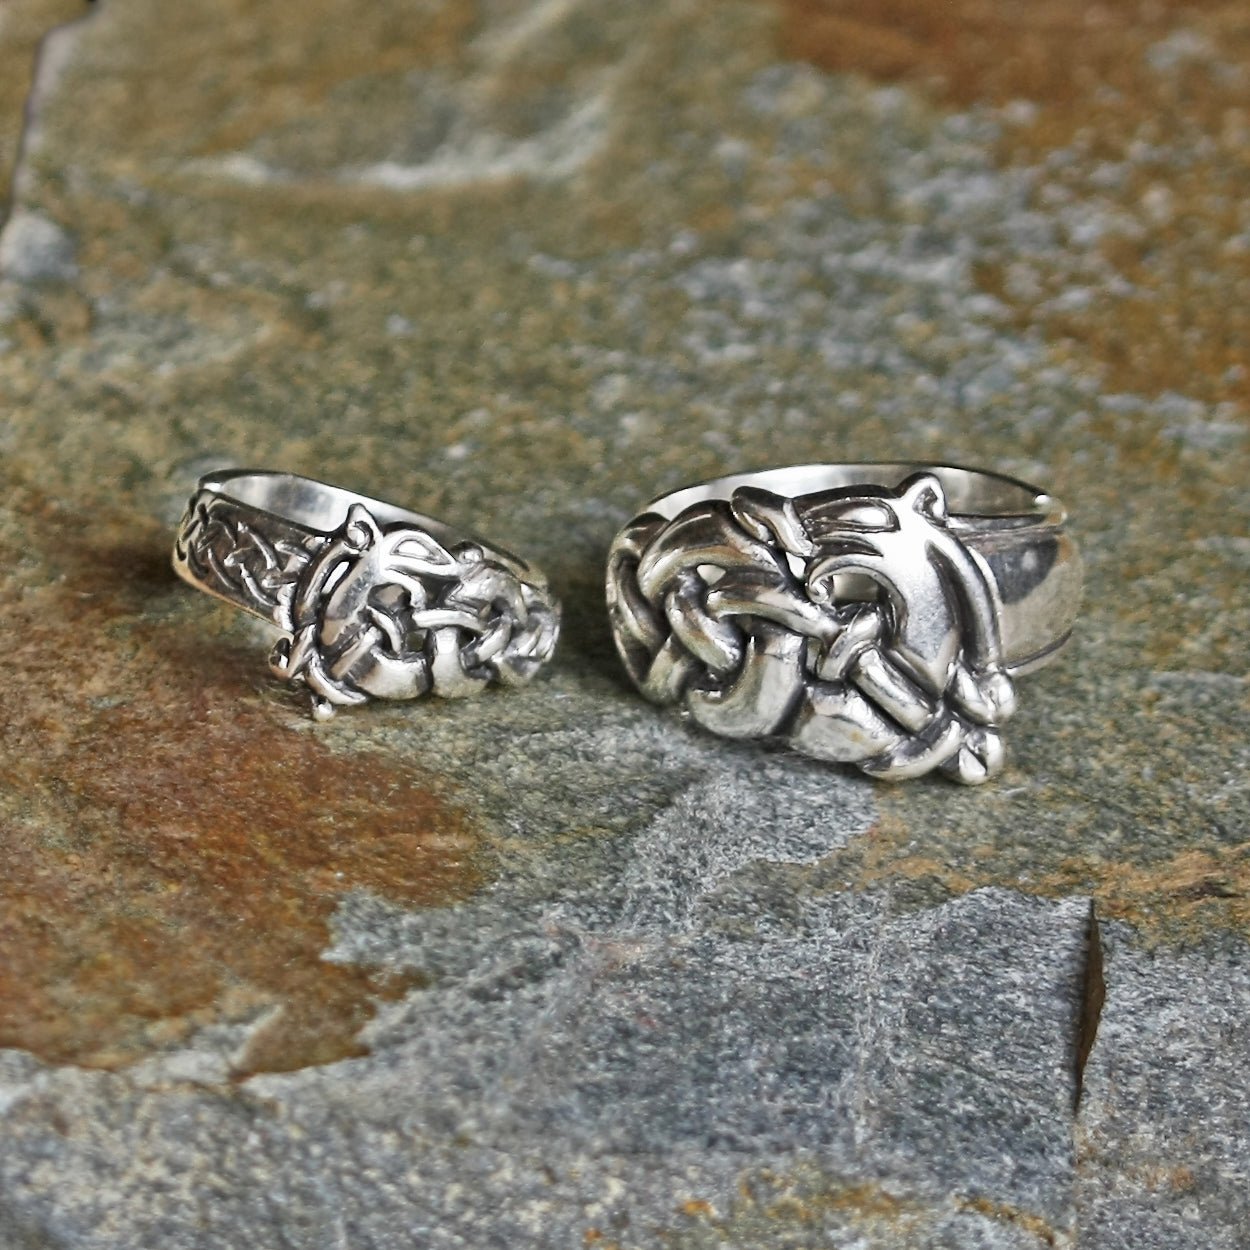 Silver Urnes Viking Dragon Ring in Small and Large Sizes - Viking Rings